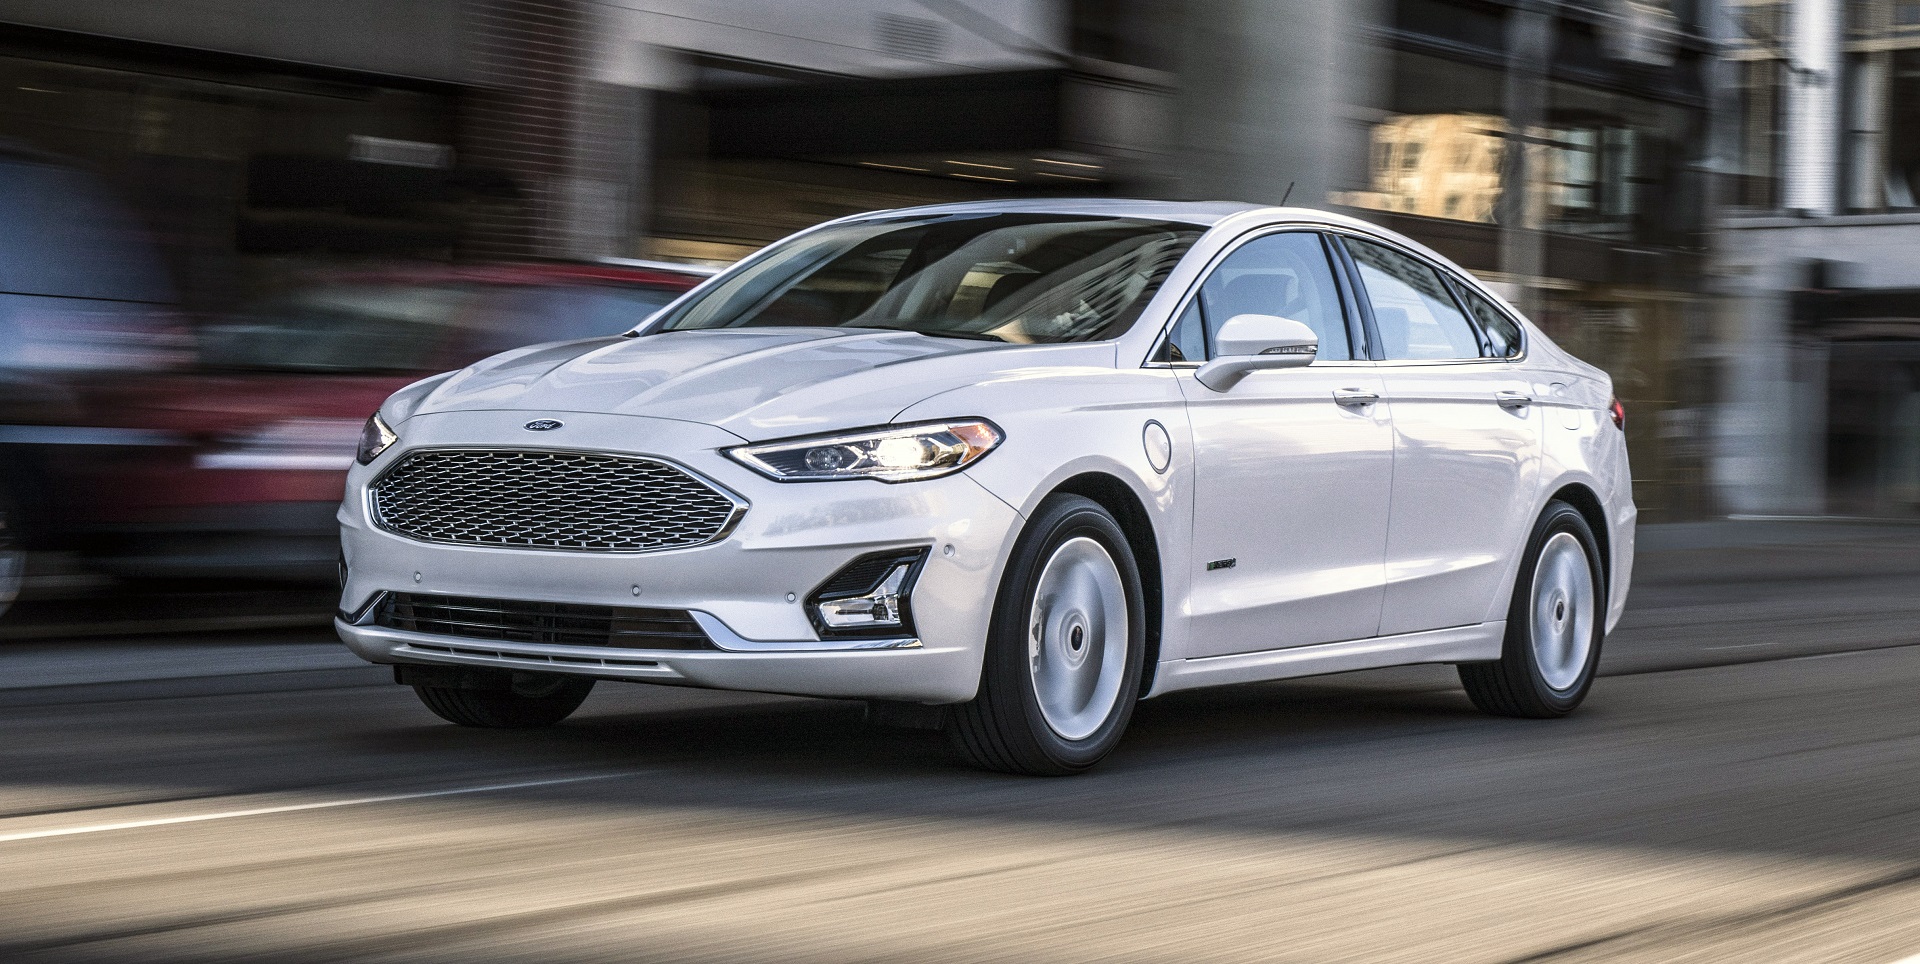 Types of Hybrid Cars - Plug-in Hybrid Electric Vehicle (PHEV) – The Full Hybrid - Ford Fusion Energi